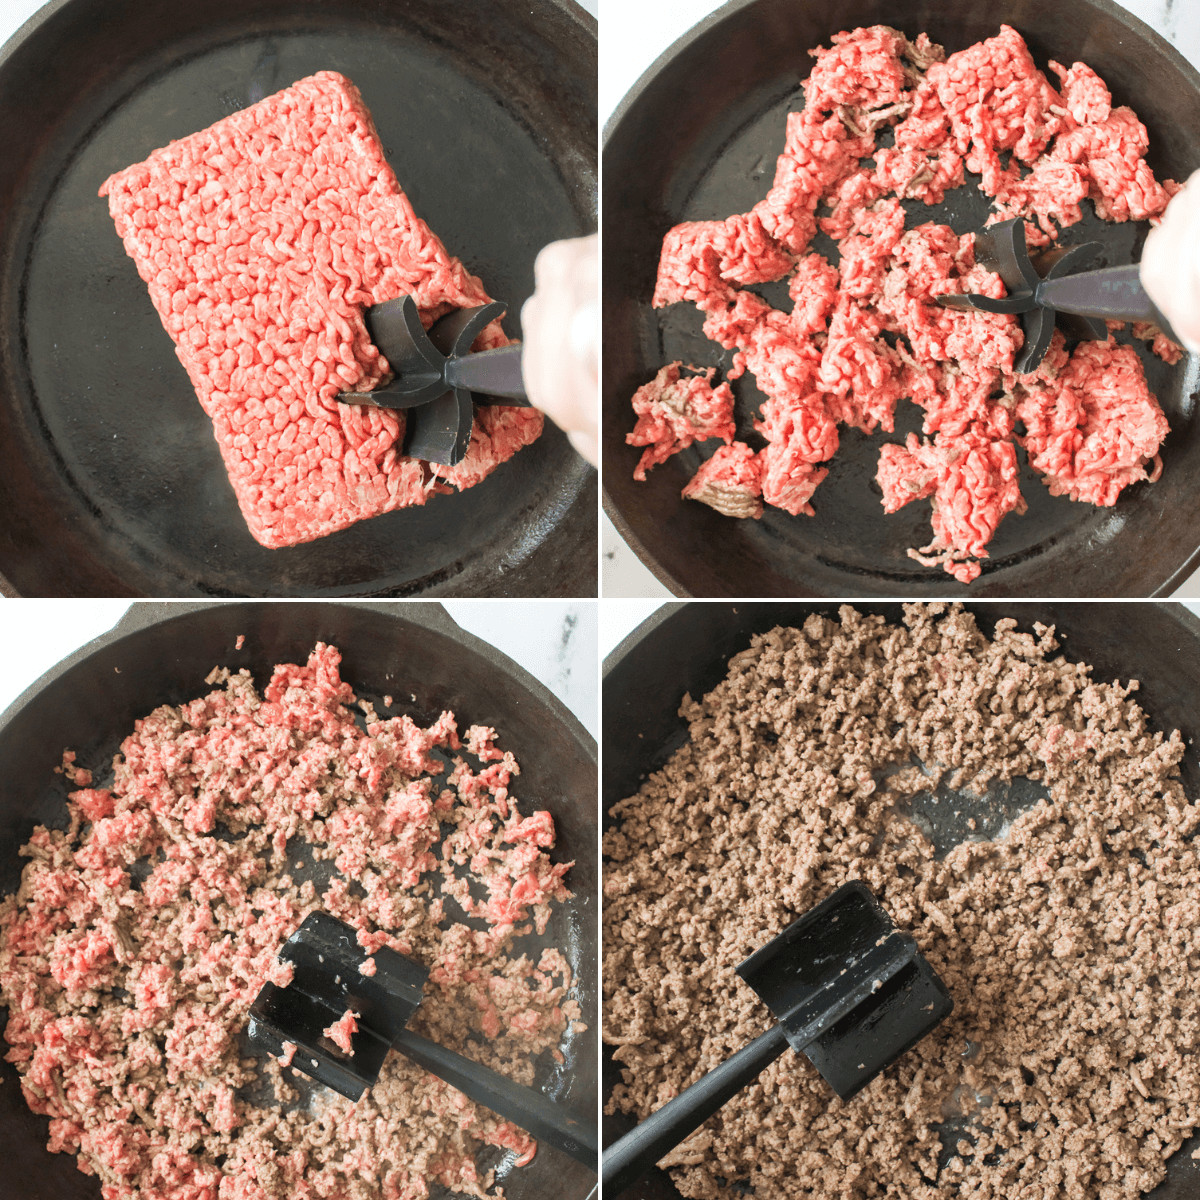 Creating the dip by cooking the meat.